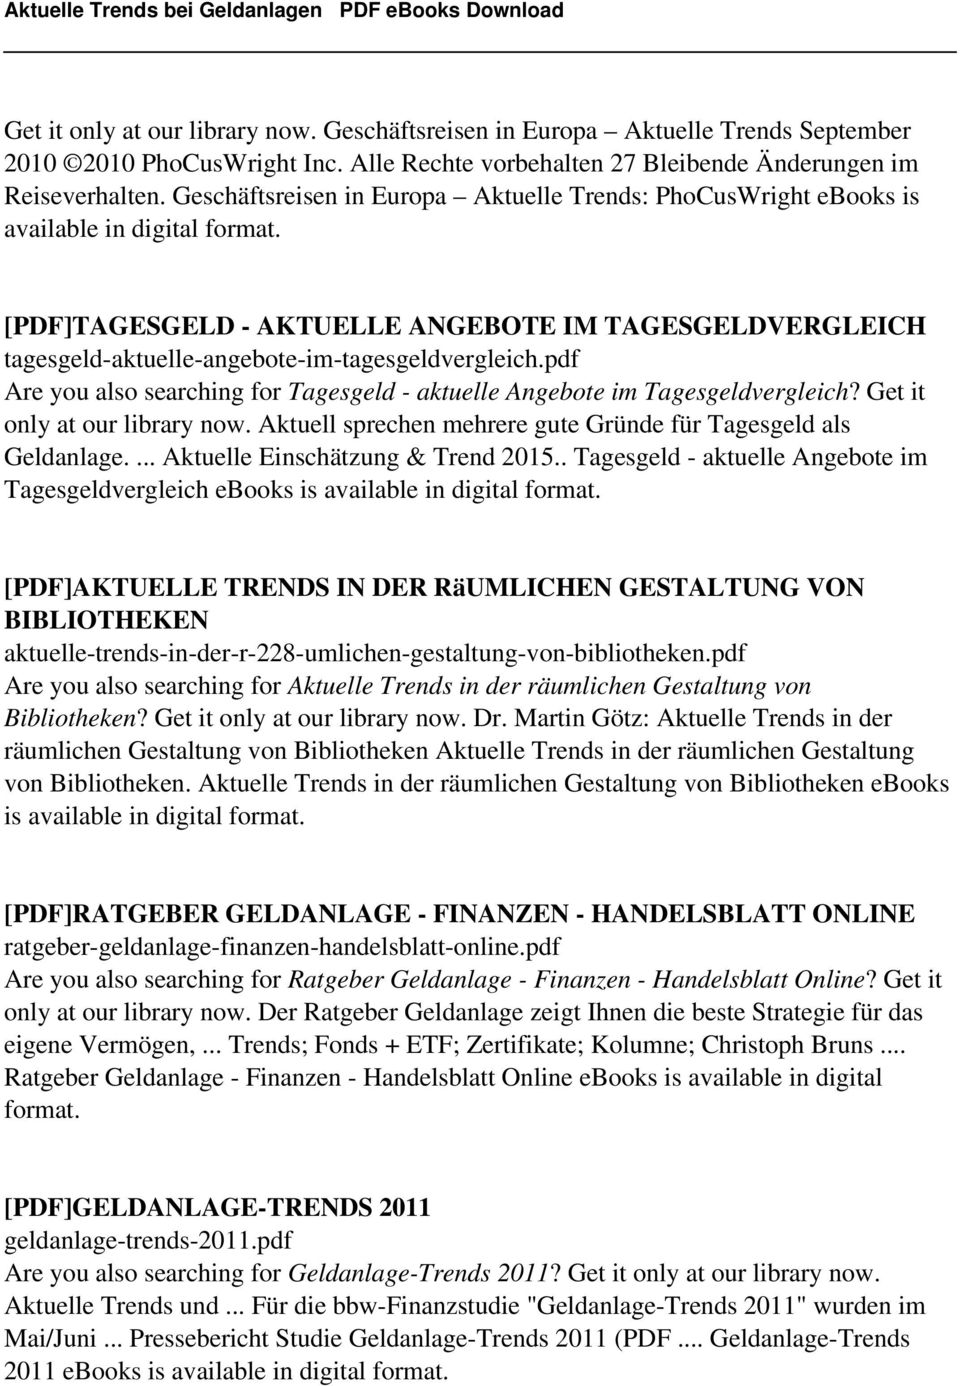 [PDF]TAGESGELD - AKTUELLE ANGEBOTE IM TAGESGELDVERGLEICH tagesgeld-aktuelle-angebote-im-tagesgeldvergleich.pdf Are you also searching for Tagesgeld - aktuelle Angebote im Tagesgeldvergleich?